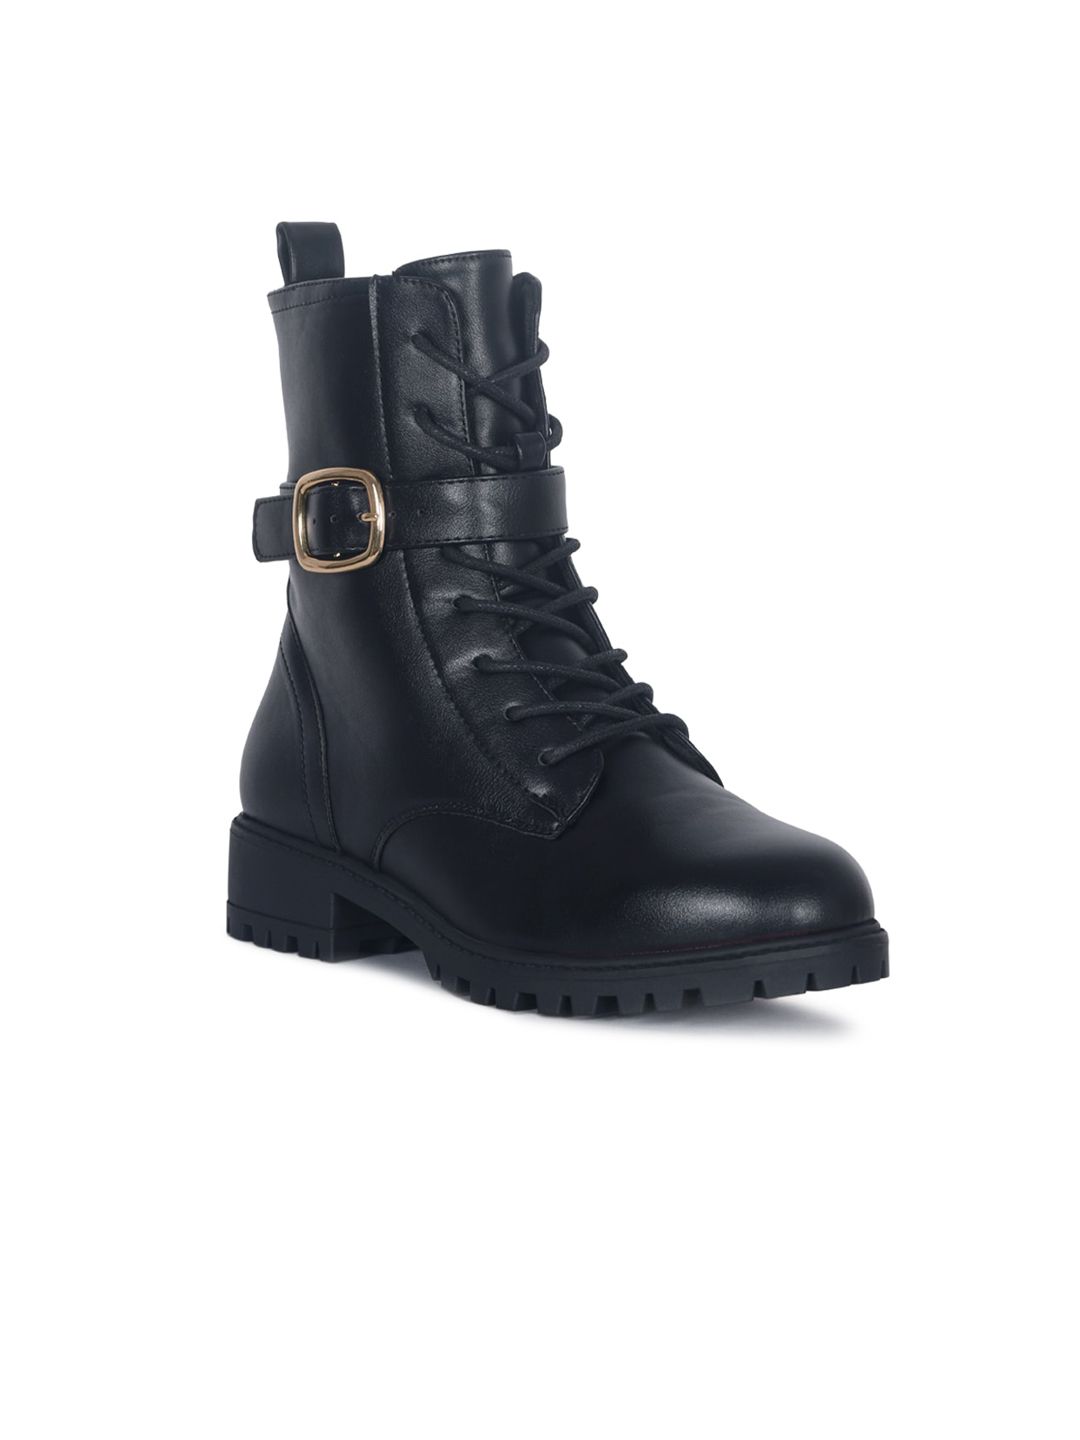 London Rag Black Heeled Boots with Buckle Price in India